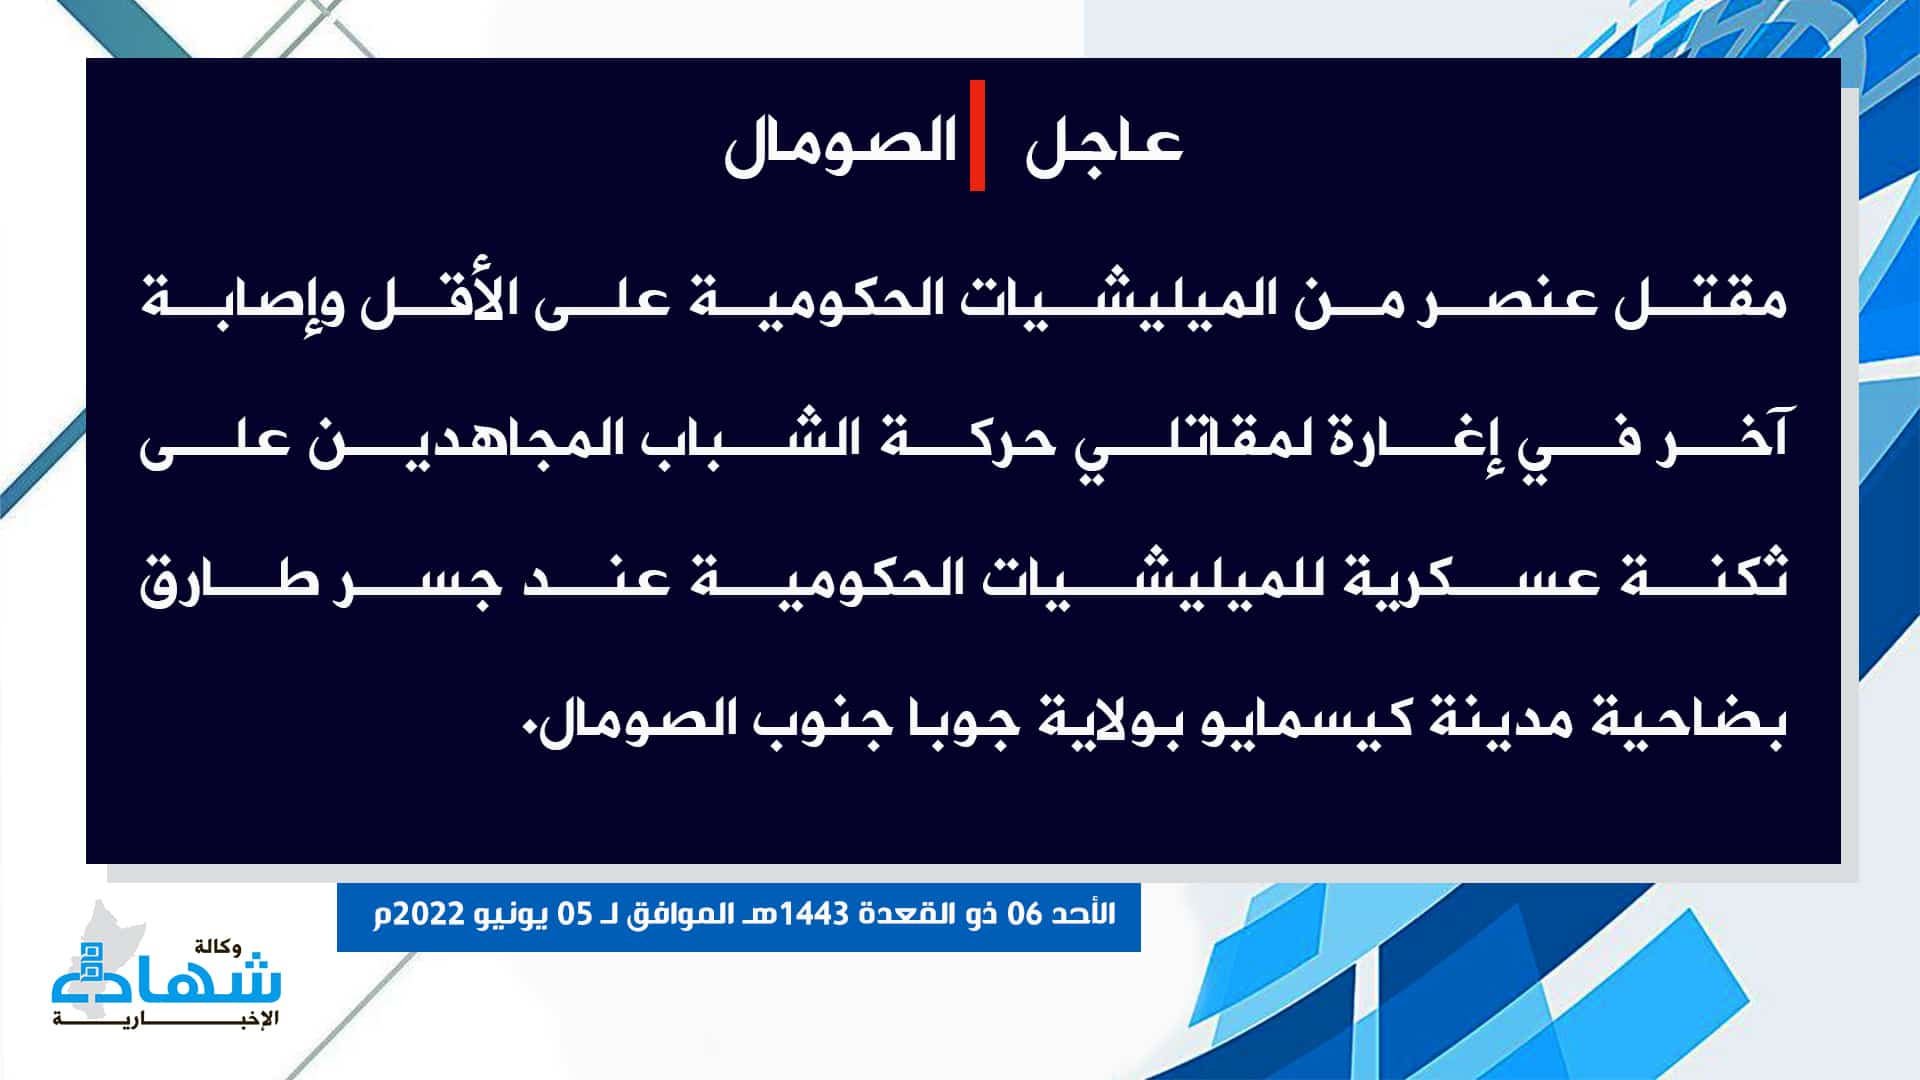 (Claim) al-Shabaab: At Least a Somalian Forces' Element Was Killed and Another Wounded in an Attack on a Military Base on Tariq Bridge, Kismayo, Juba State, Southern Somalia - 5 June 2022